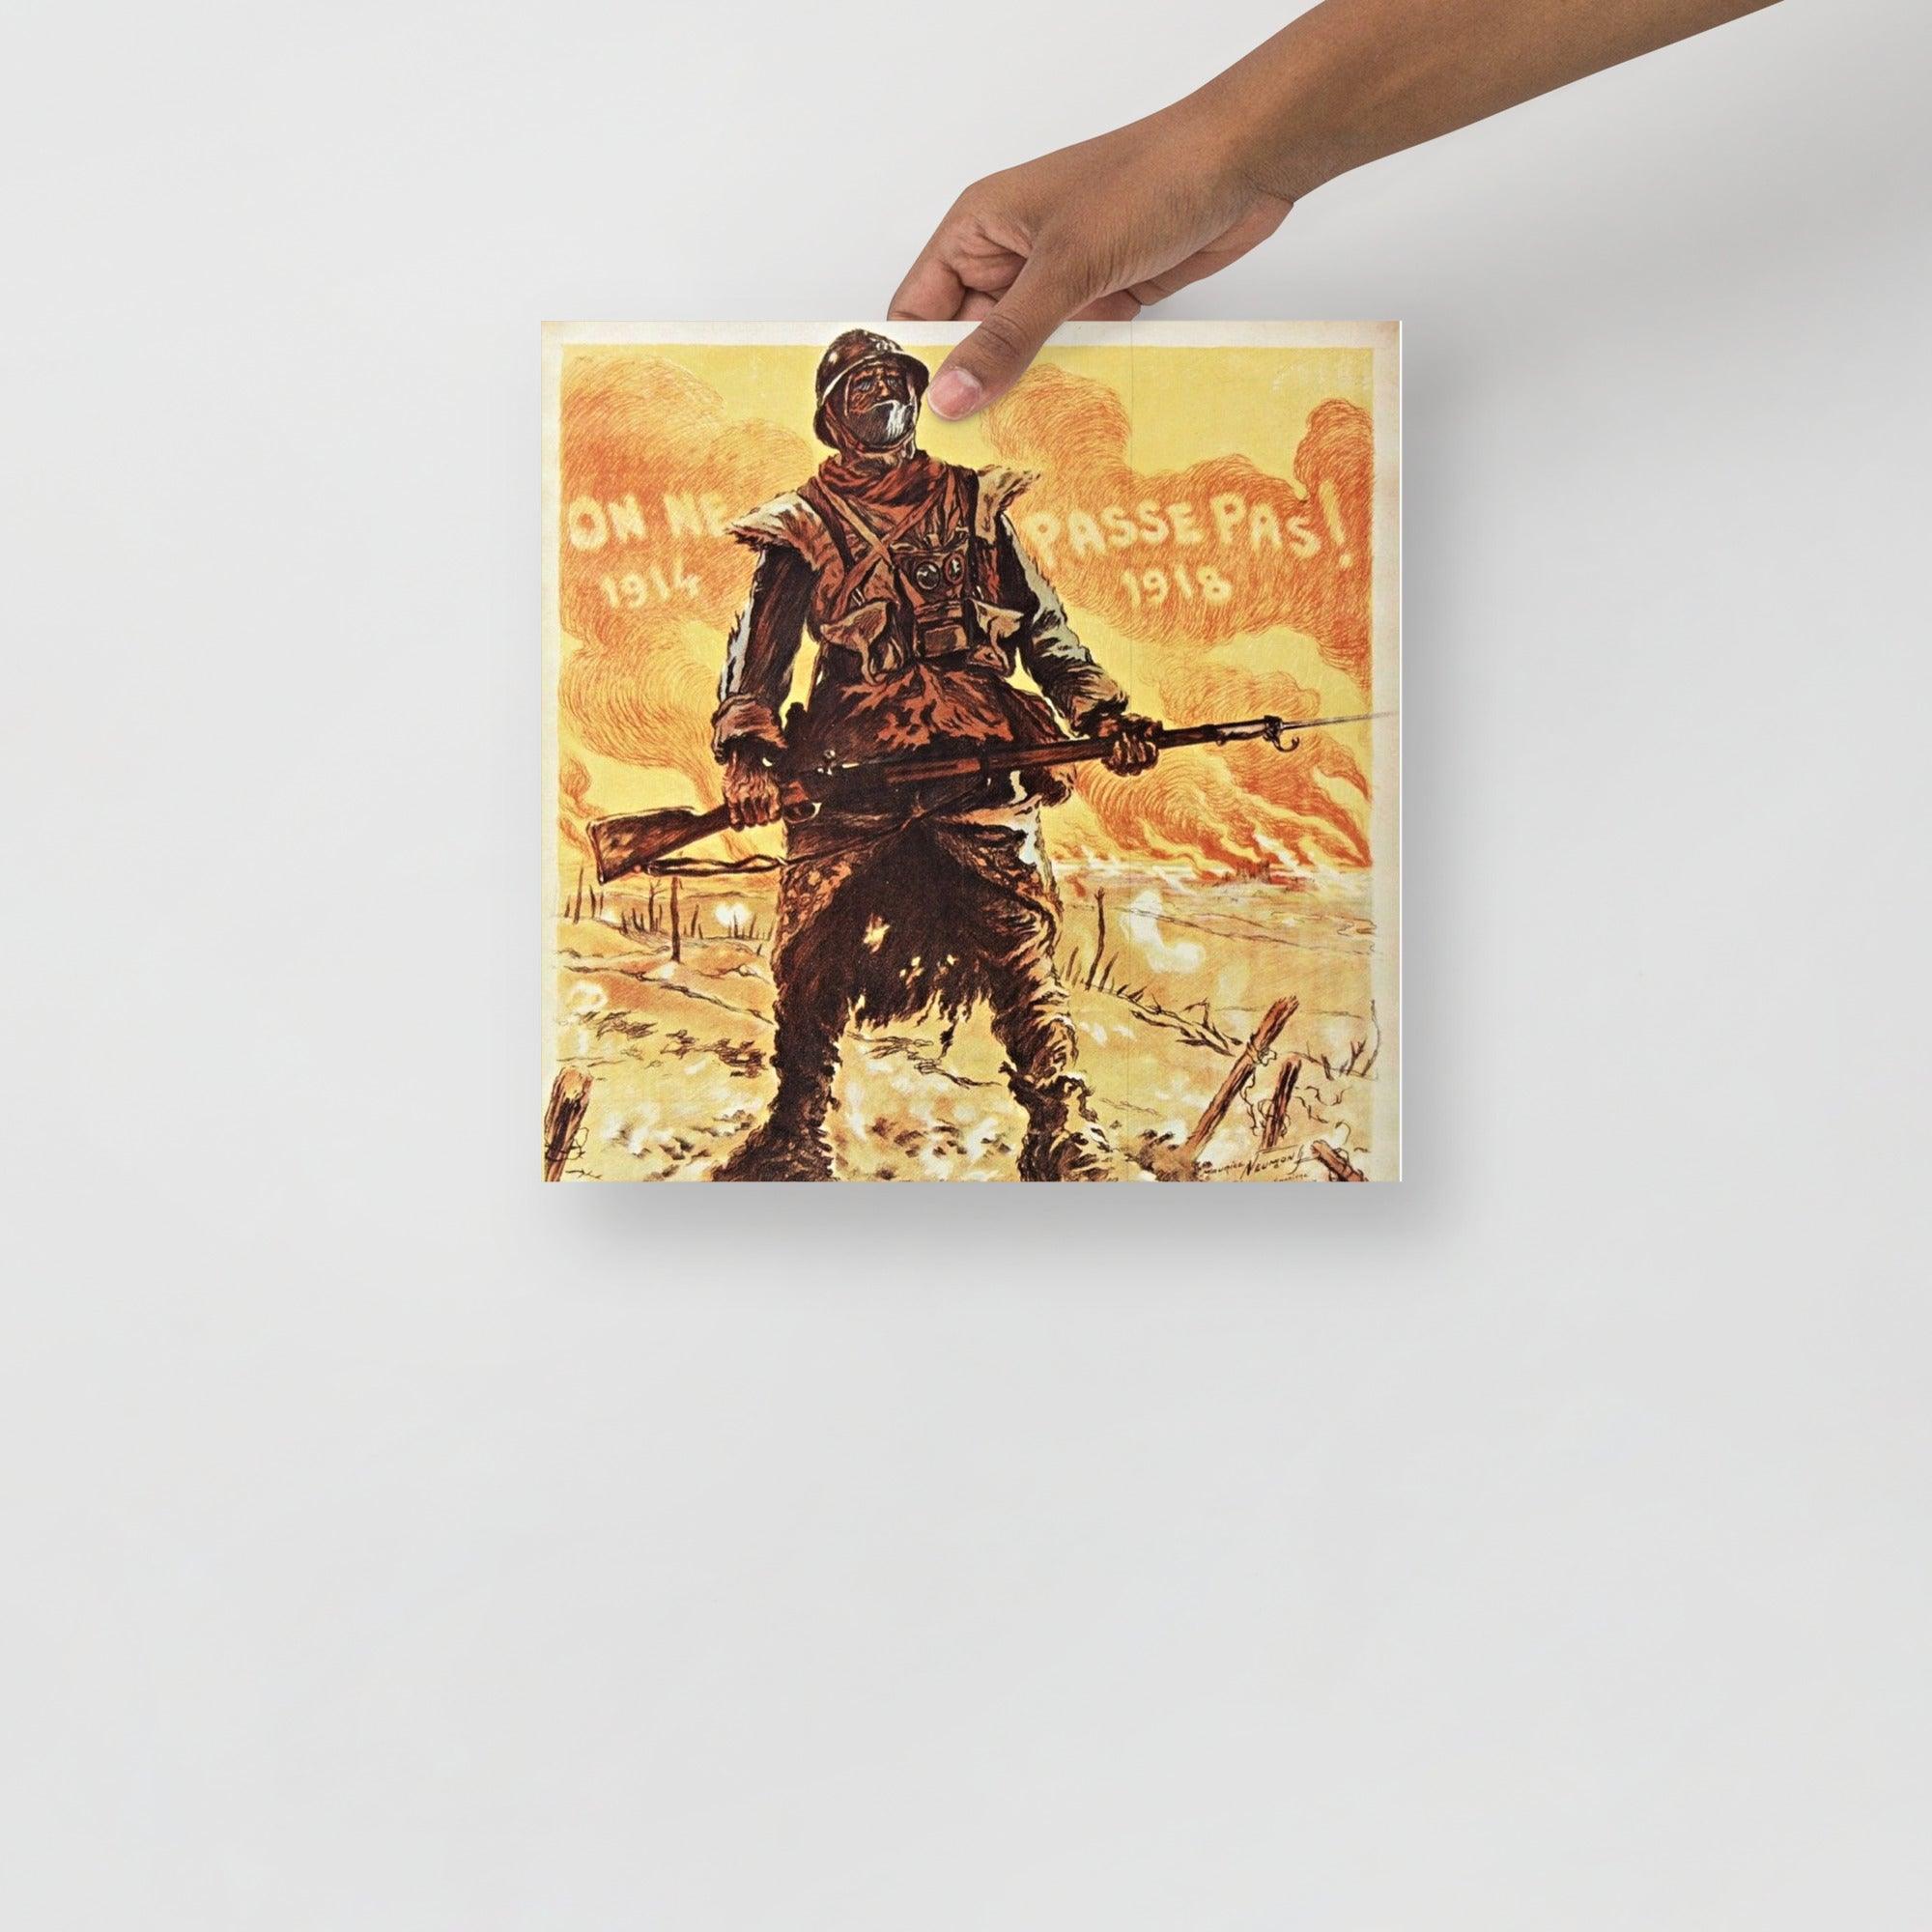 A They Shall Not Pass (On Ne Passe Pas) By Maurice Neumont poster on a plain backdrop in size 12x12”.